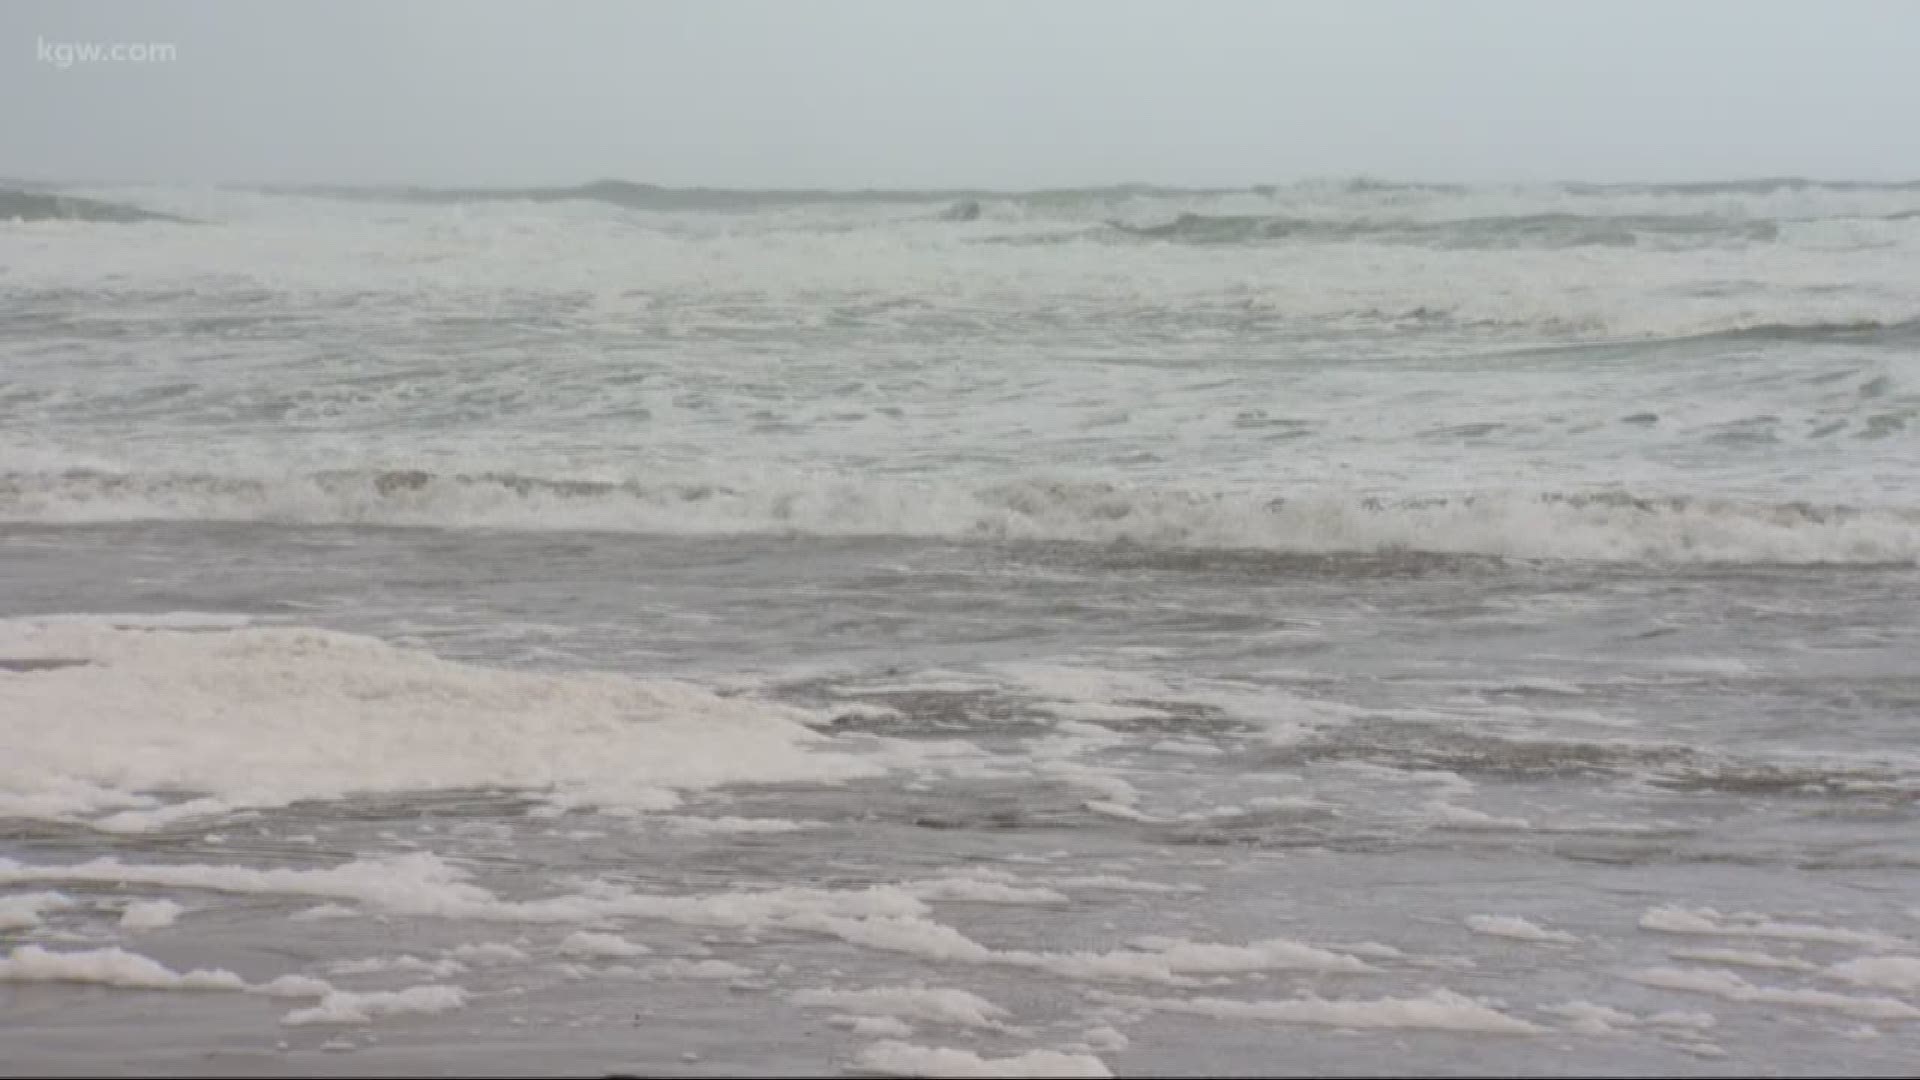 Crews are searching for the child near Falcon Cove, in the area of Arch Cape and Cannon Beach. A High Surf Warning was in effect due to high tides.